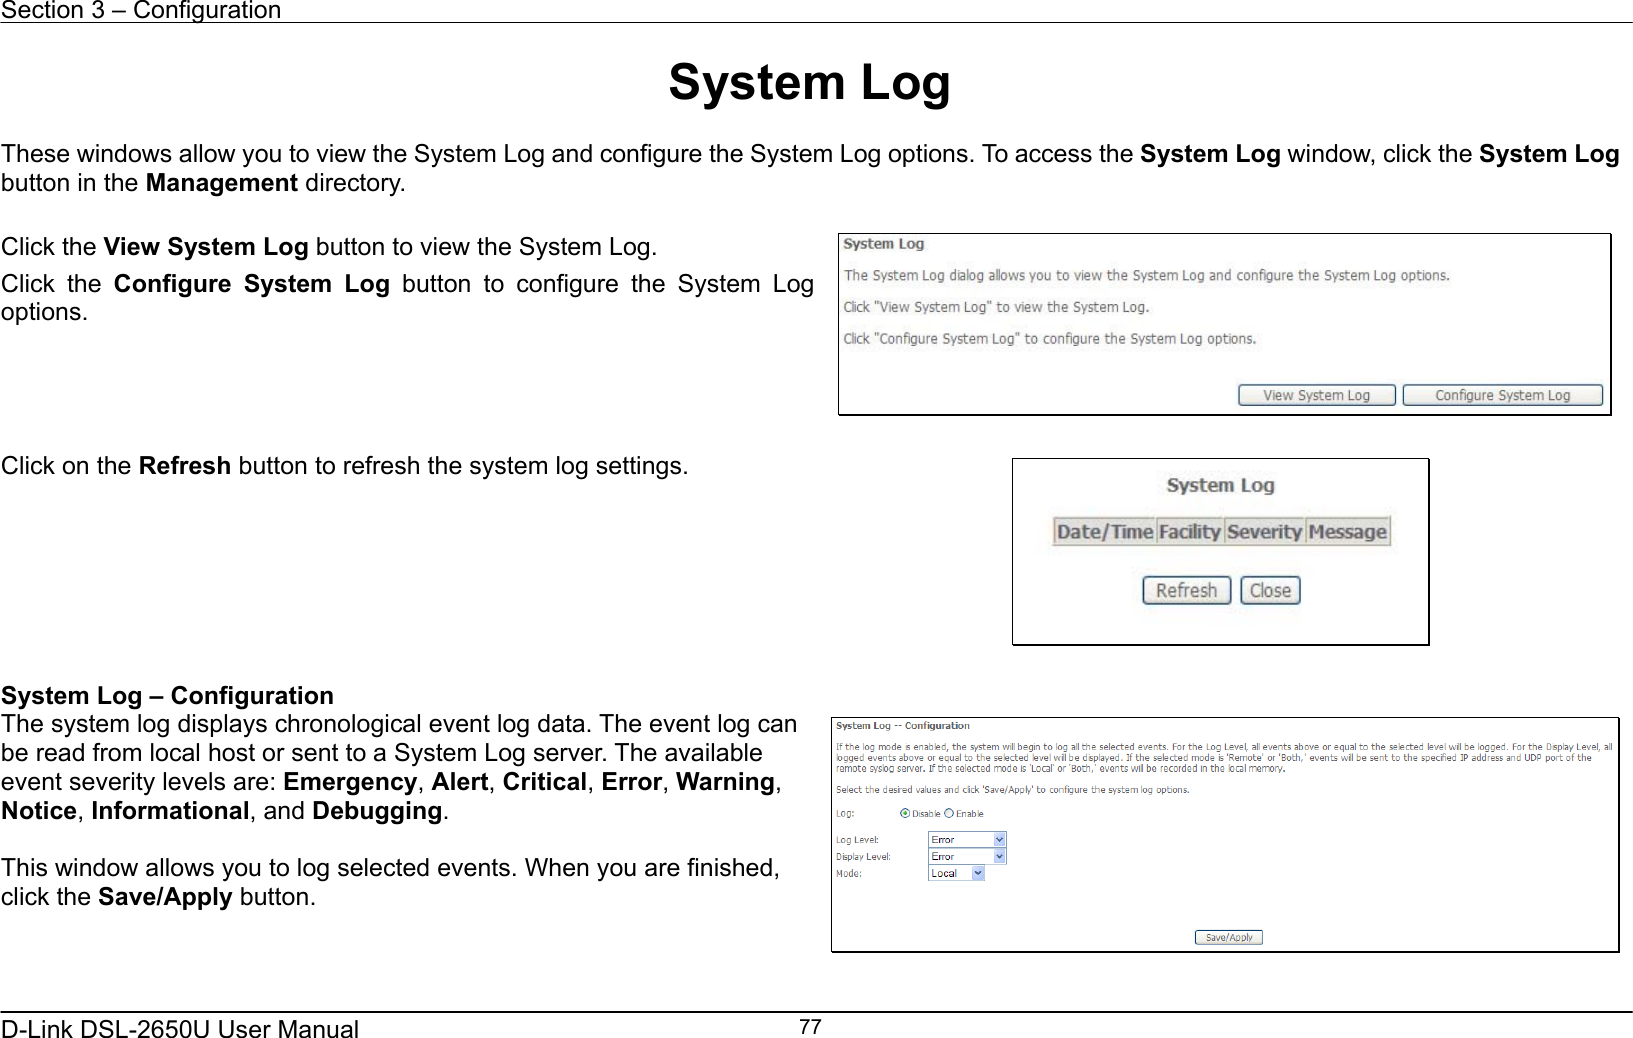 Section 3 – Configuration   D-Link DSL-2650U User Manual    77System Log  These windows allow you to view the System Log and configure the System Log options. To access the System Log window, click the System Log button in the Management directory.  Click the View System Log button to view the System Log. Click the Configure System Log button to configure the System Log options.     Click on the Refresh button to refresh the system log settings.   System Log – Configuration The system log displays chronological event log data. The event log can be read from local host or sent to a System Log server. The available event severity levels are: Emergency, Alert, Critical, Error, Warning, Notice, Informational, and Debugging.  This window allows you to log selected events. When you are finished, click the Save/Apply button.    